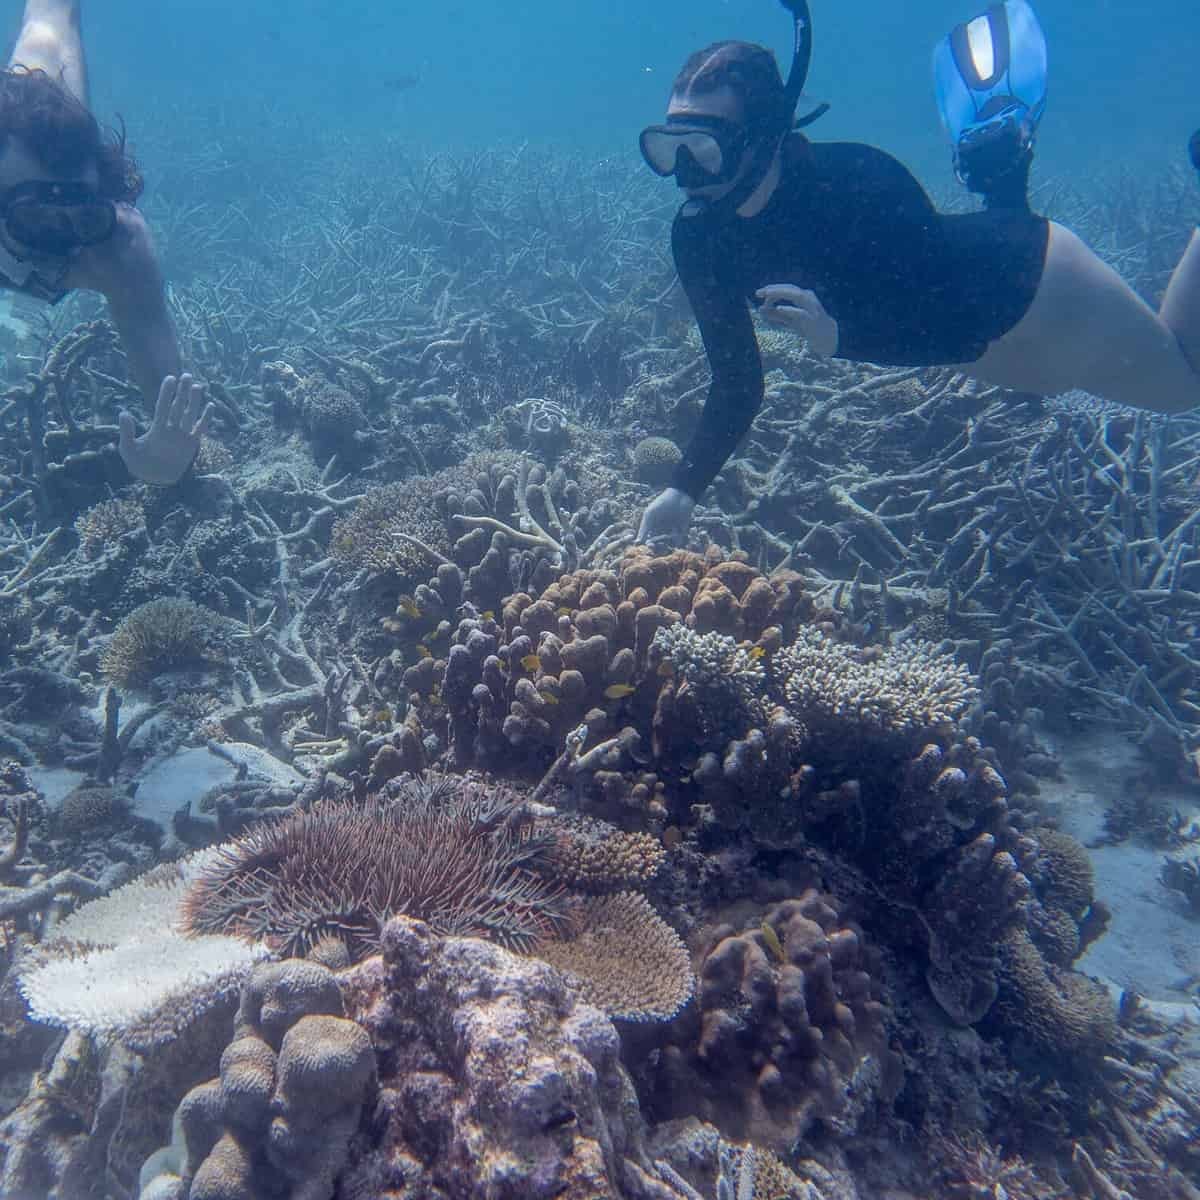 Researchers Amelia Desbiens and Dr Kenny wolf inspect a COTS on a reef near Heron Island (Image Credit: Caitlin Lawson)